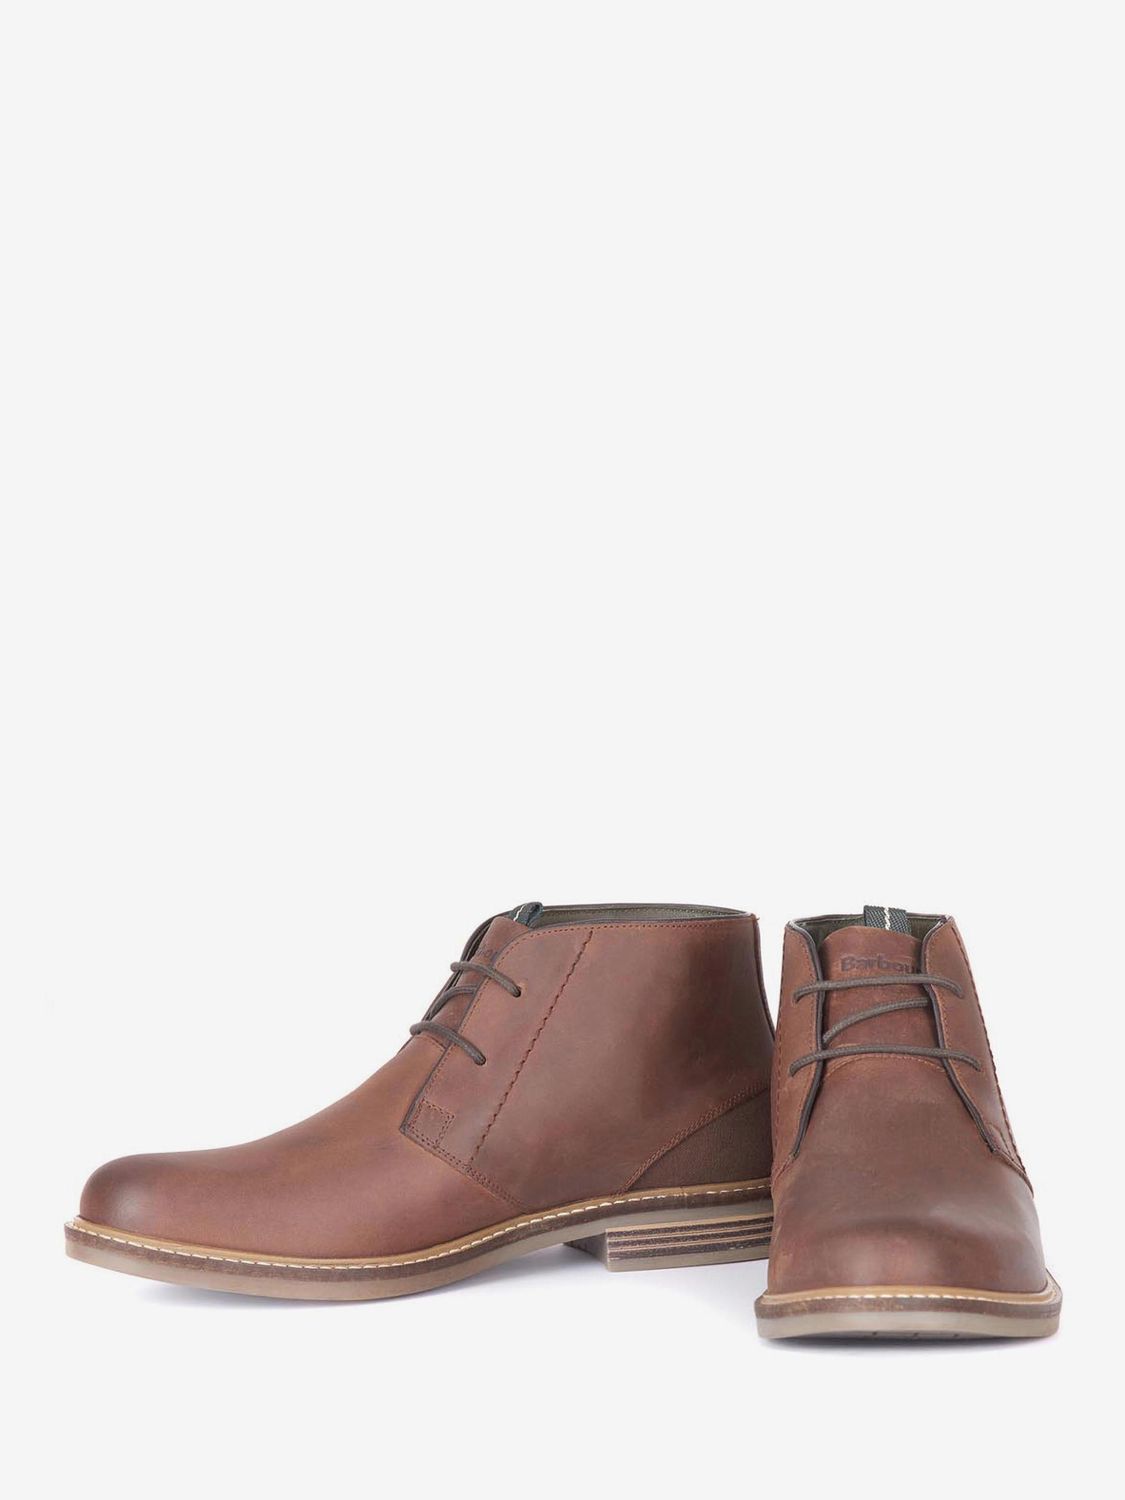 Barbour Redhead Leather Chukka Boots, Dark Tan at John Lewis & Partners